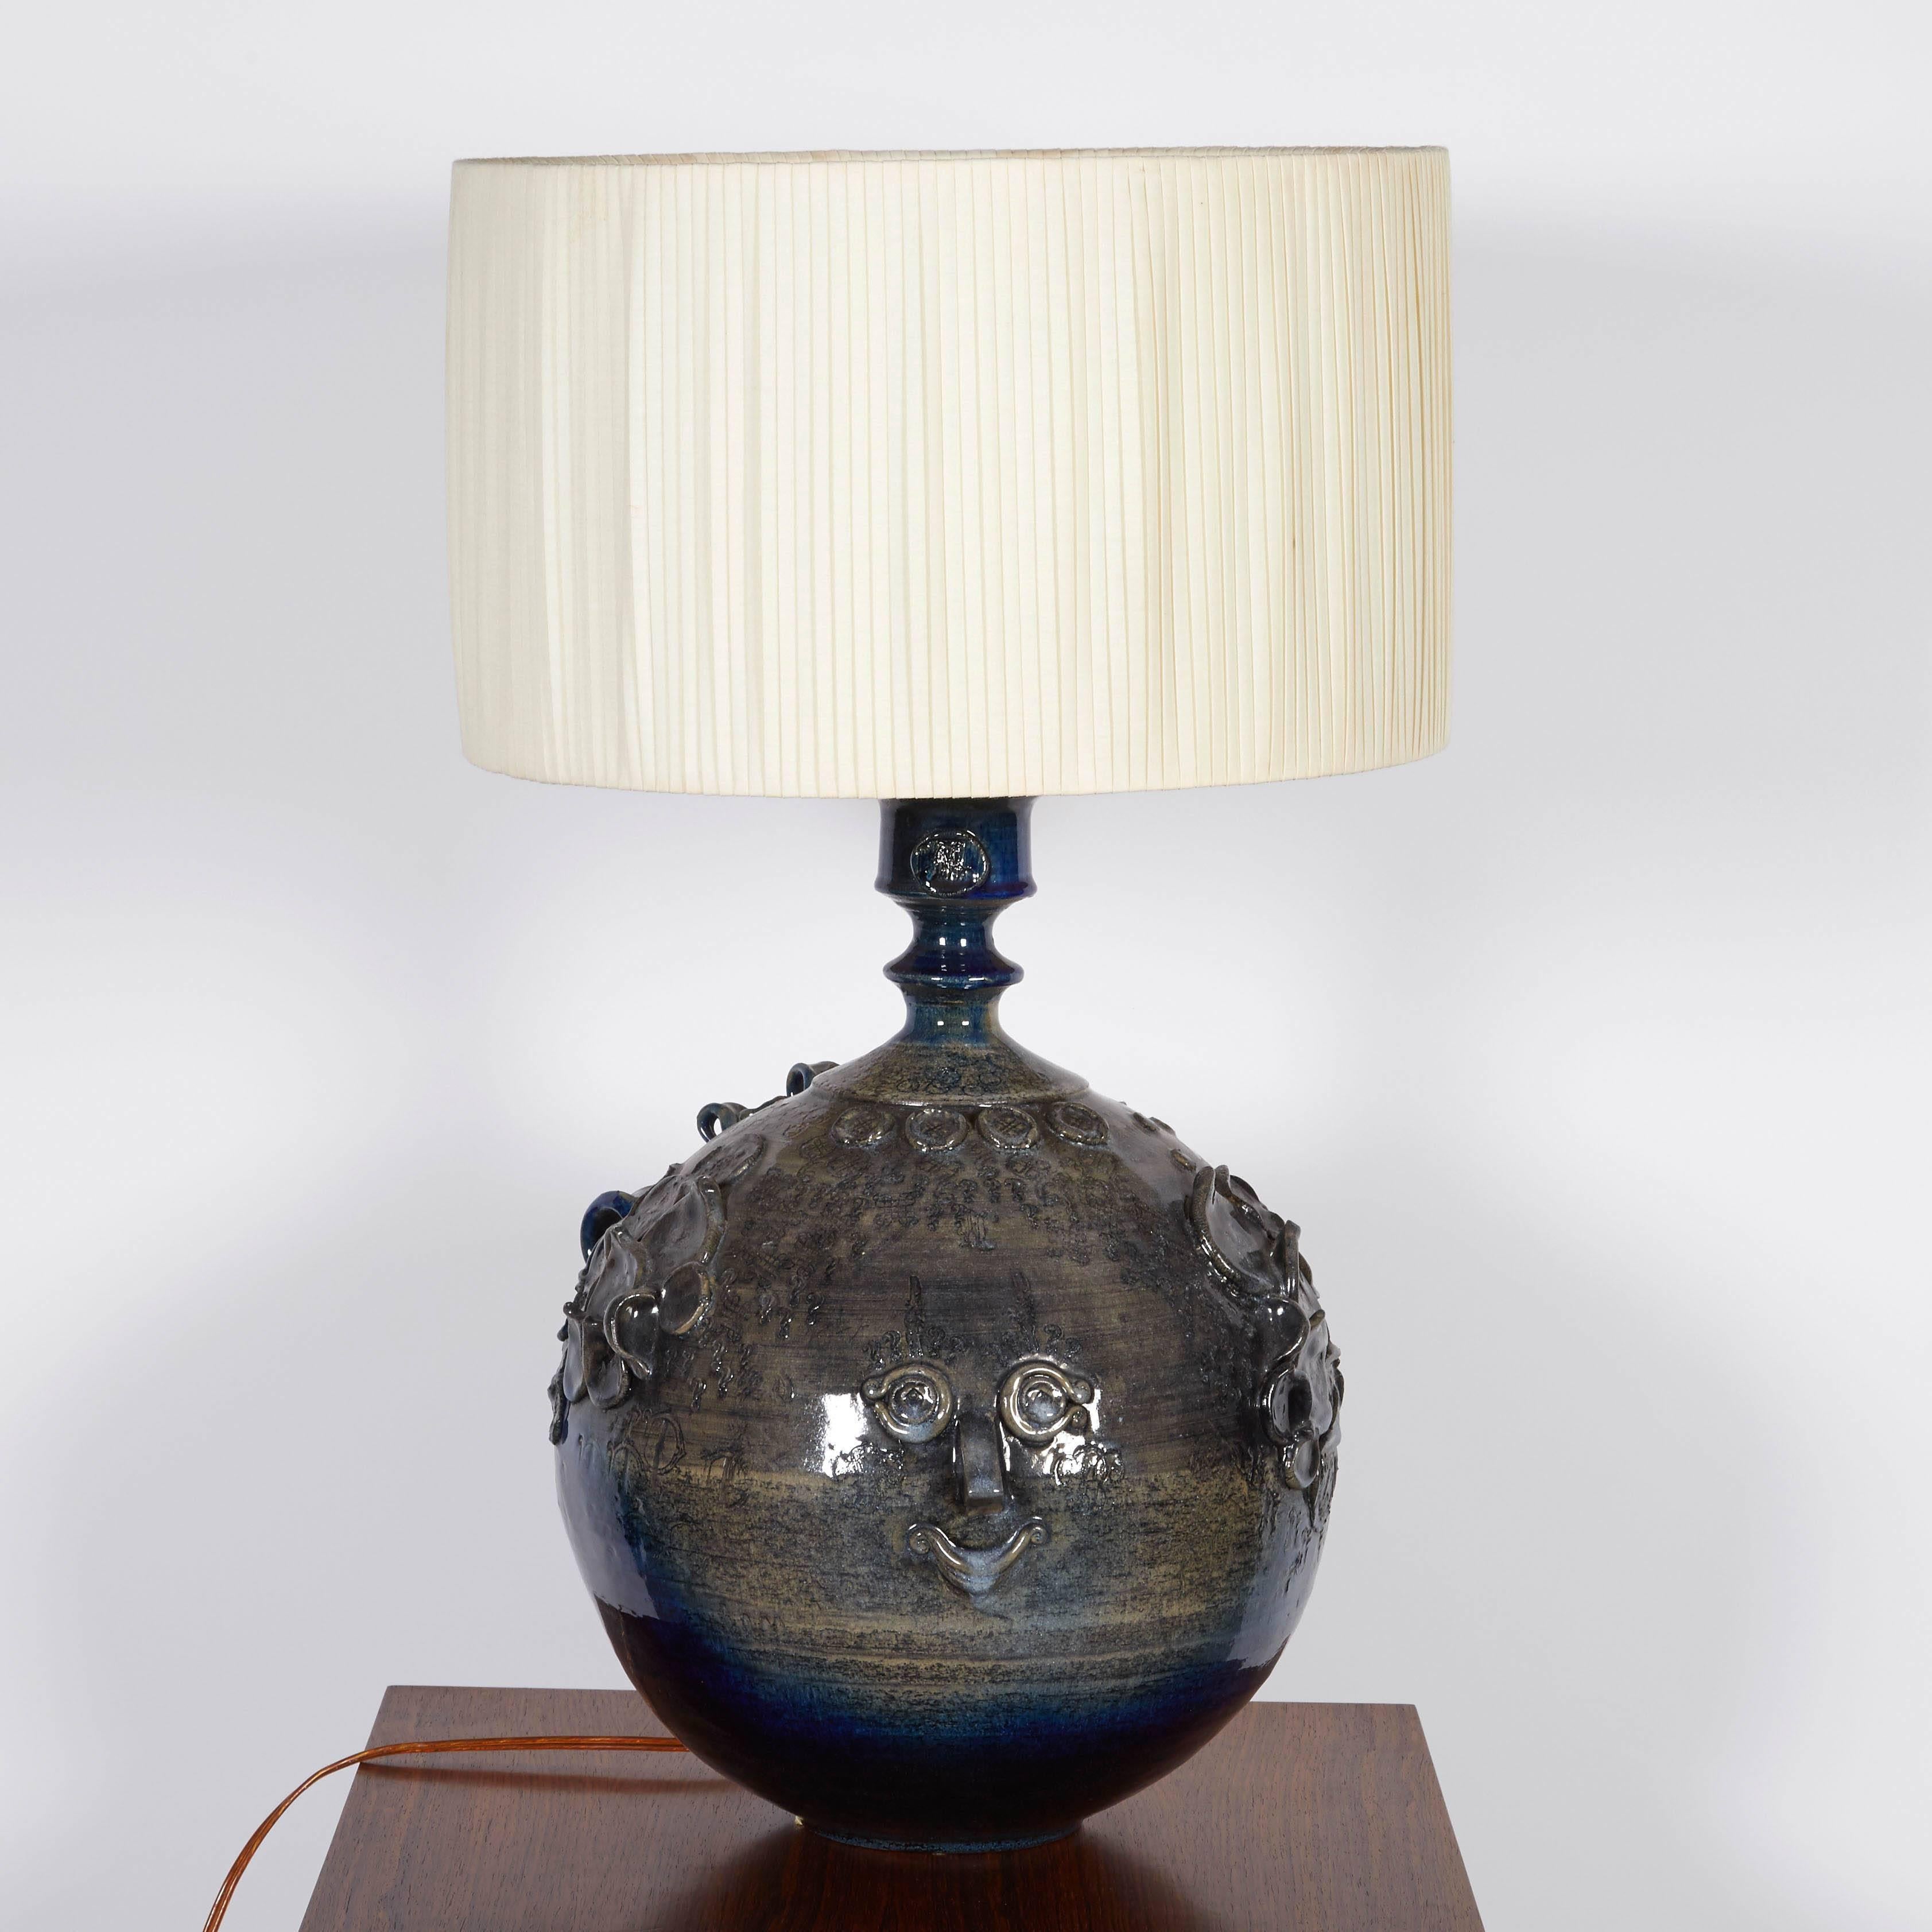 Vintage 1960s Bjorn Wiinblad Ceramic Lamp 

This mid century ceramic table lamp is in very good condition. A couple of slight chips around the curly hair (photographed). Otherwise a lovely addition to any room. Ready for pick up, delivery, or